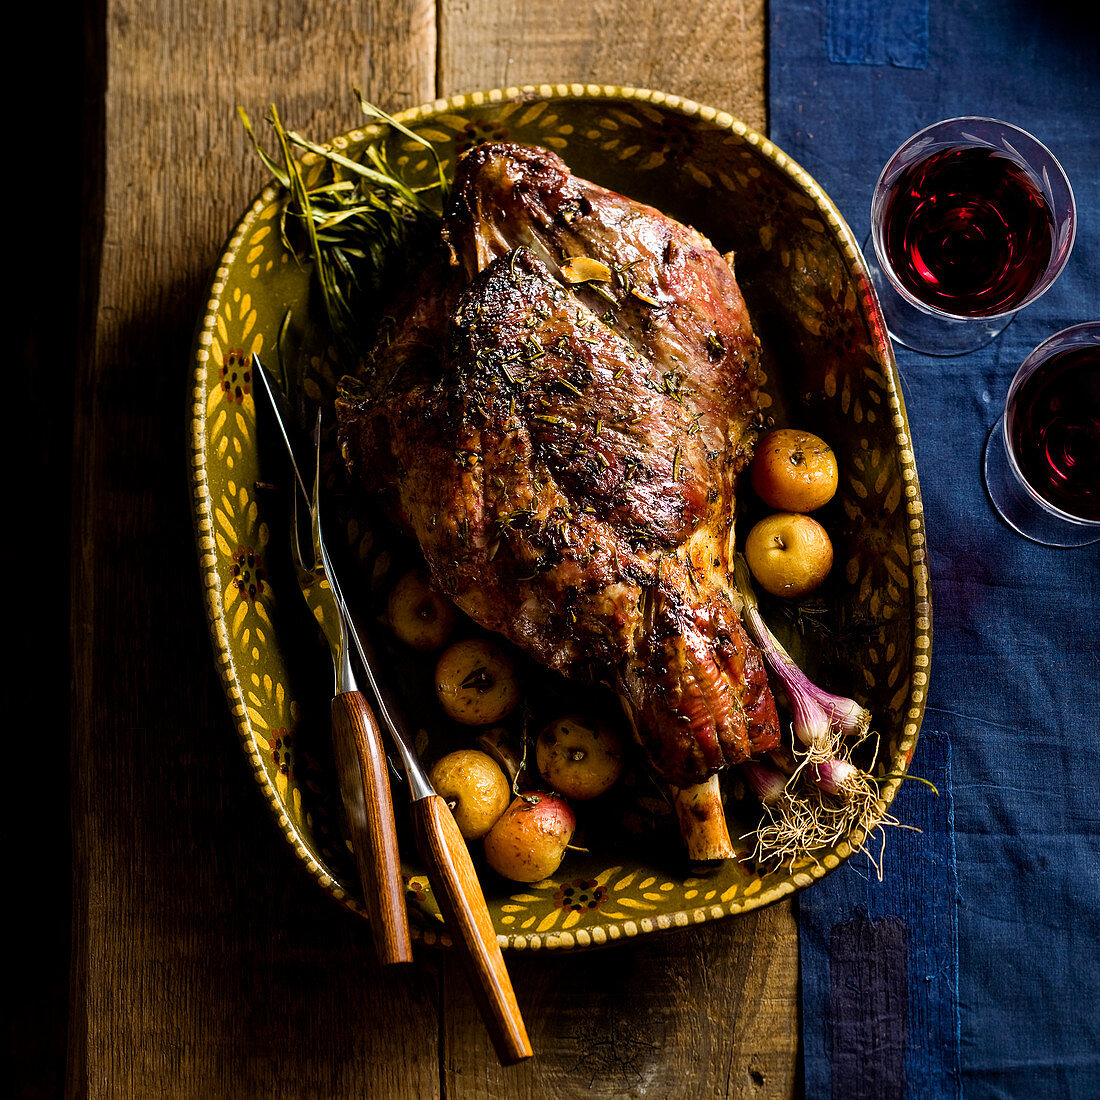 A roasted leg of lamb with herbs and apples